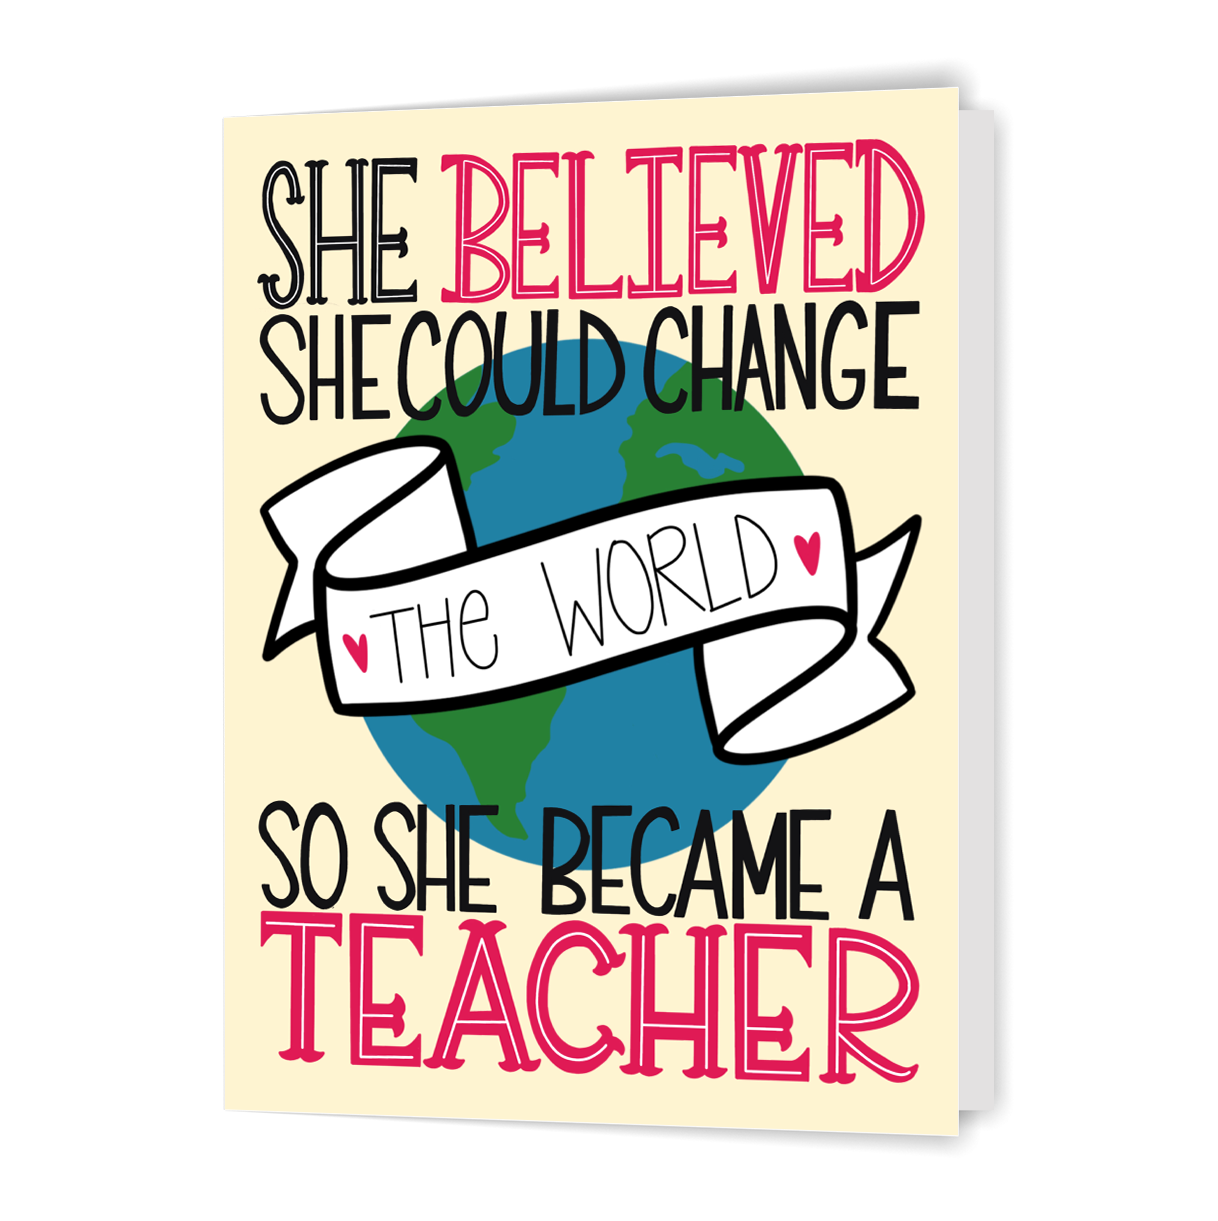 She Believed She Could Change the World, So She Became a Teacher - Greeting Card